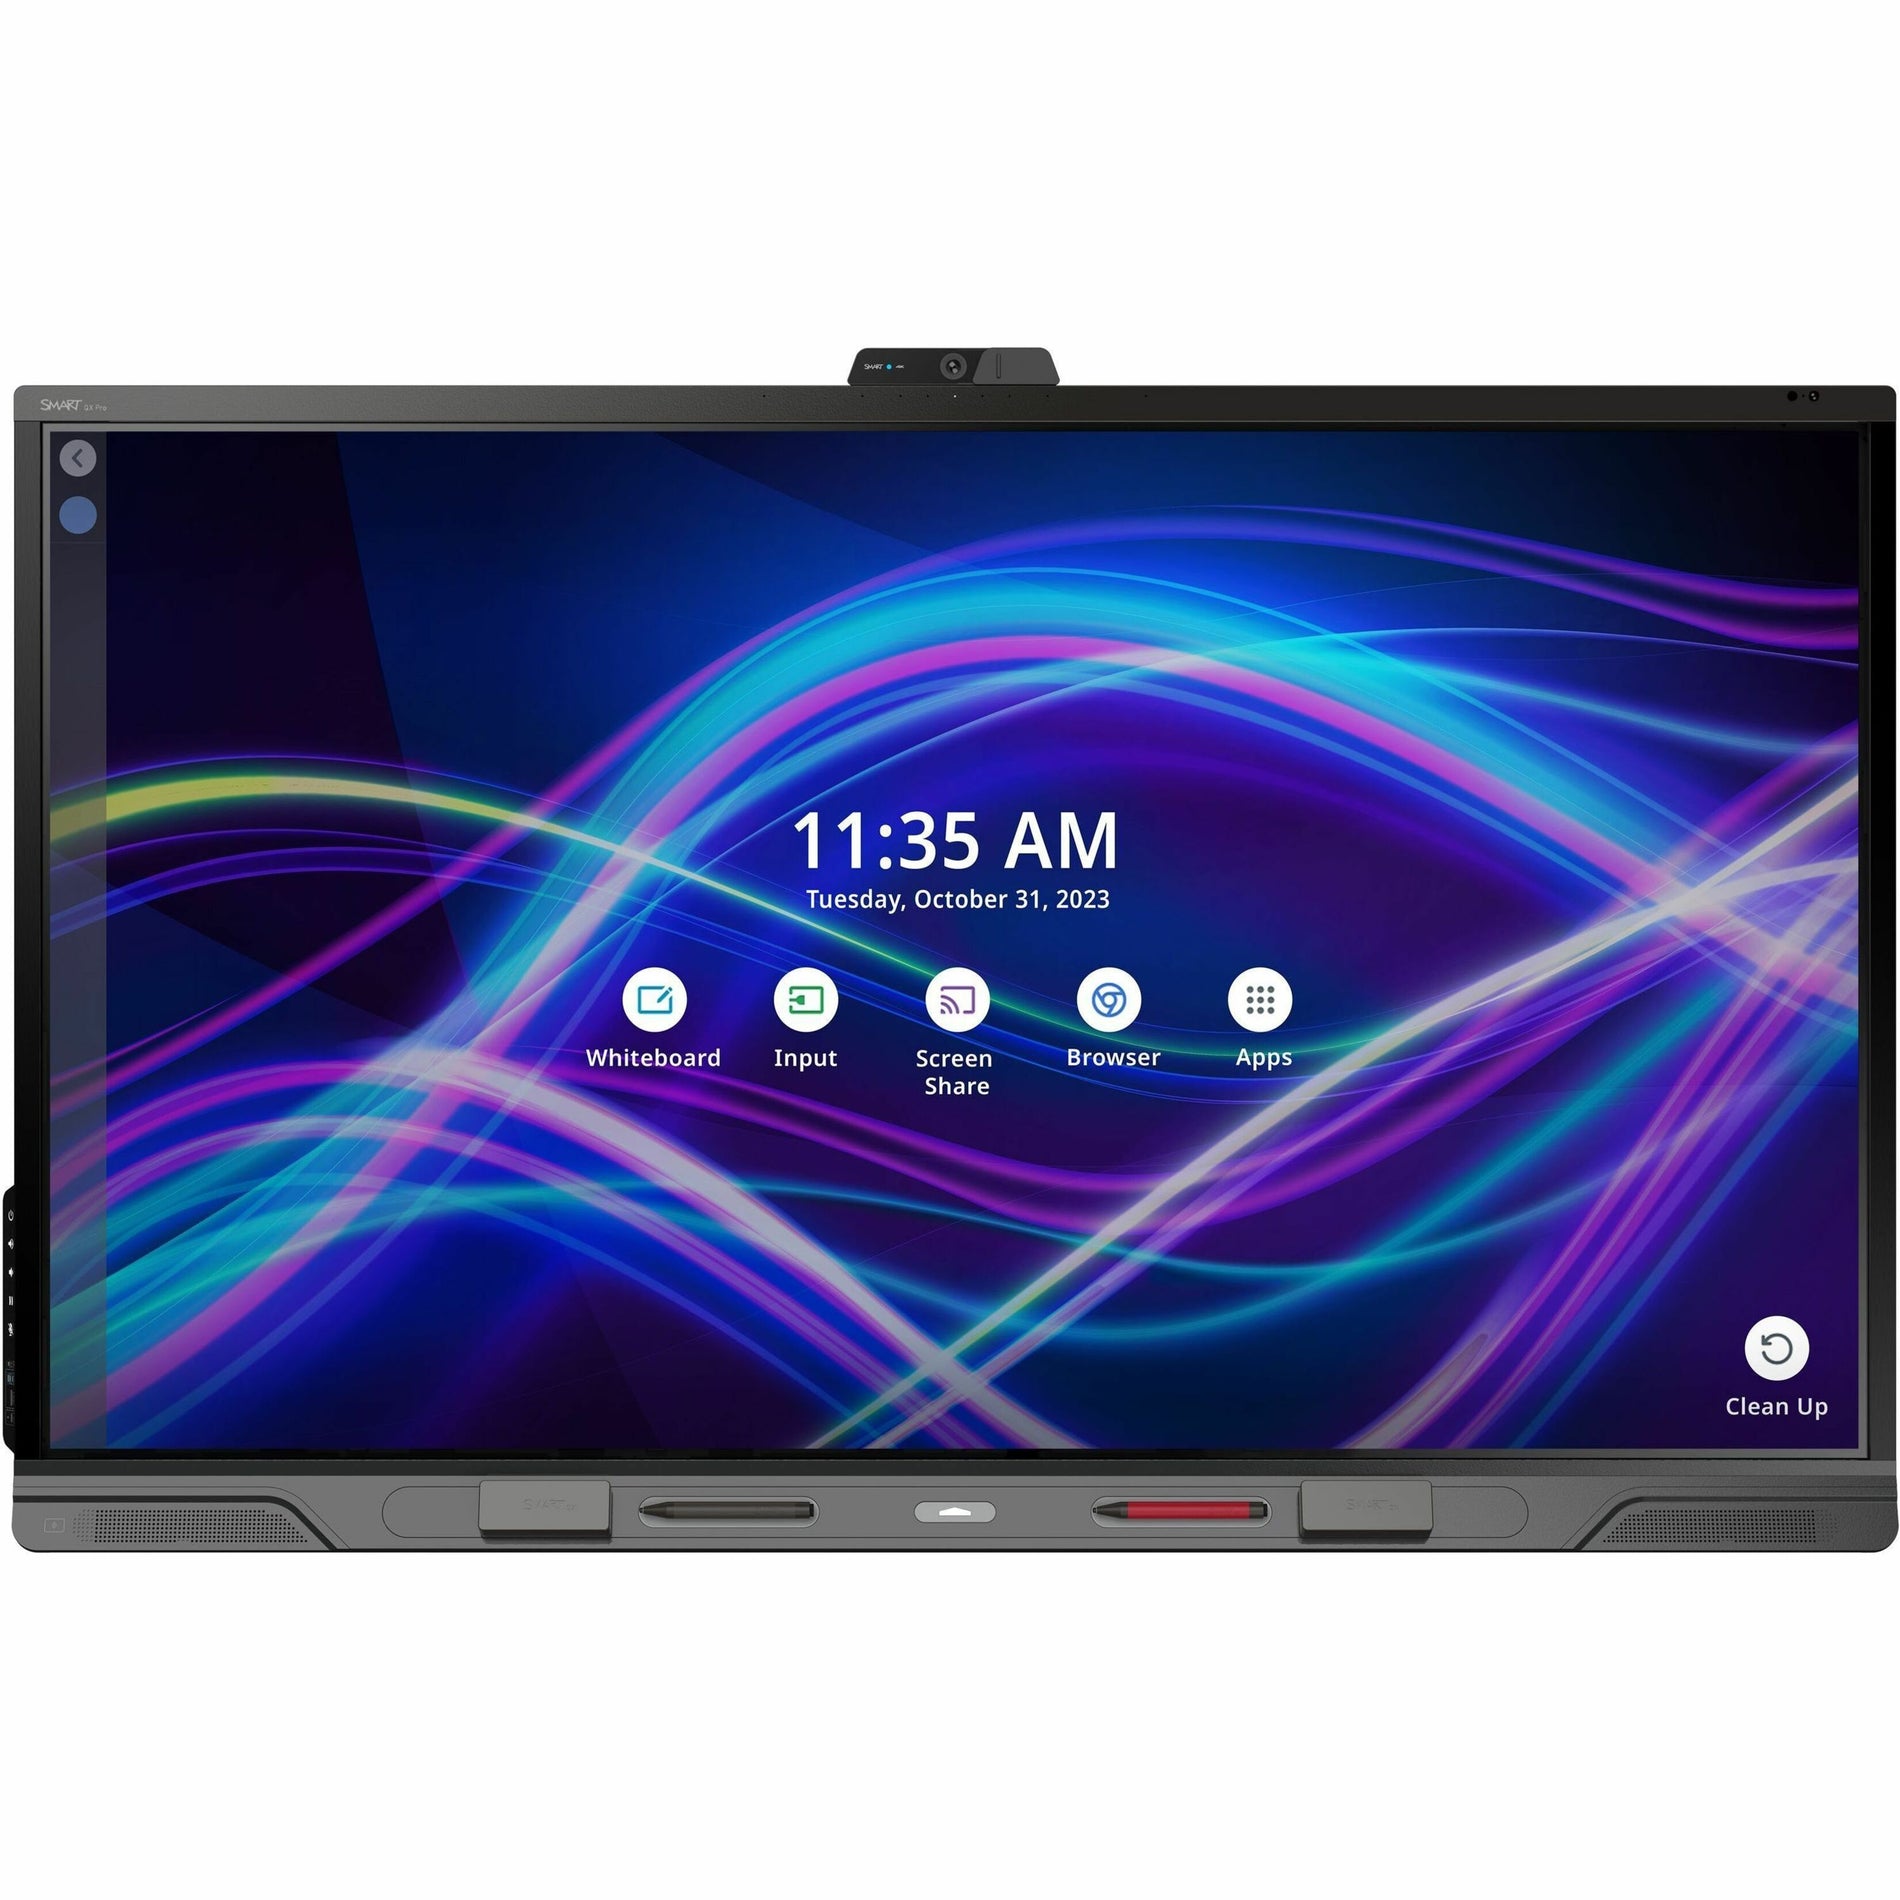 SMART SBID-QX275-P QX075-P Interactive Display with iQ, 75" Multi-touch Screen, Android 11, Energy Star